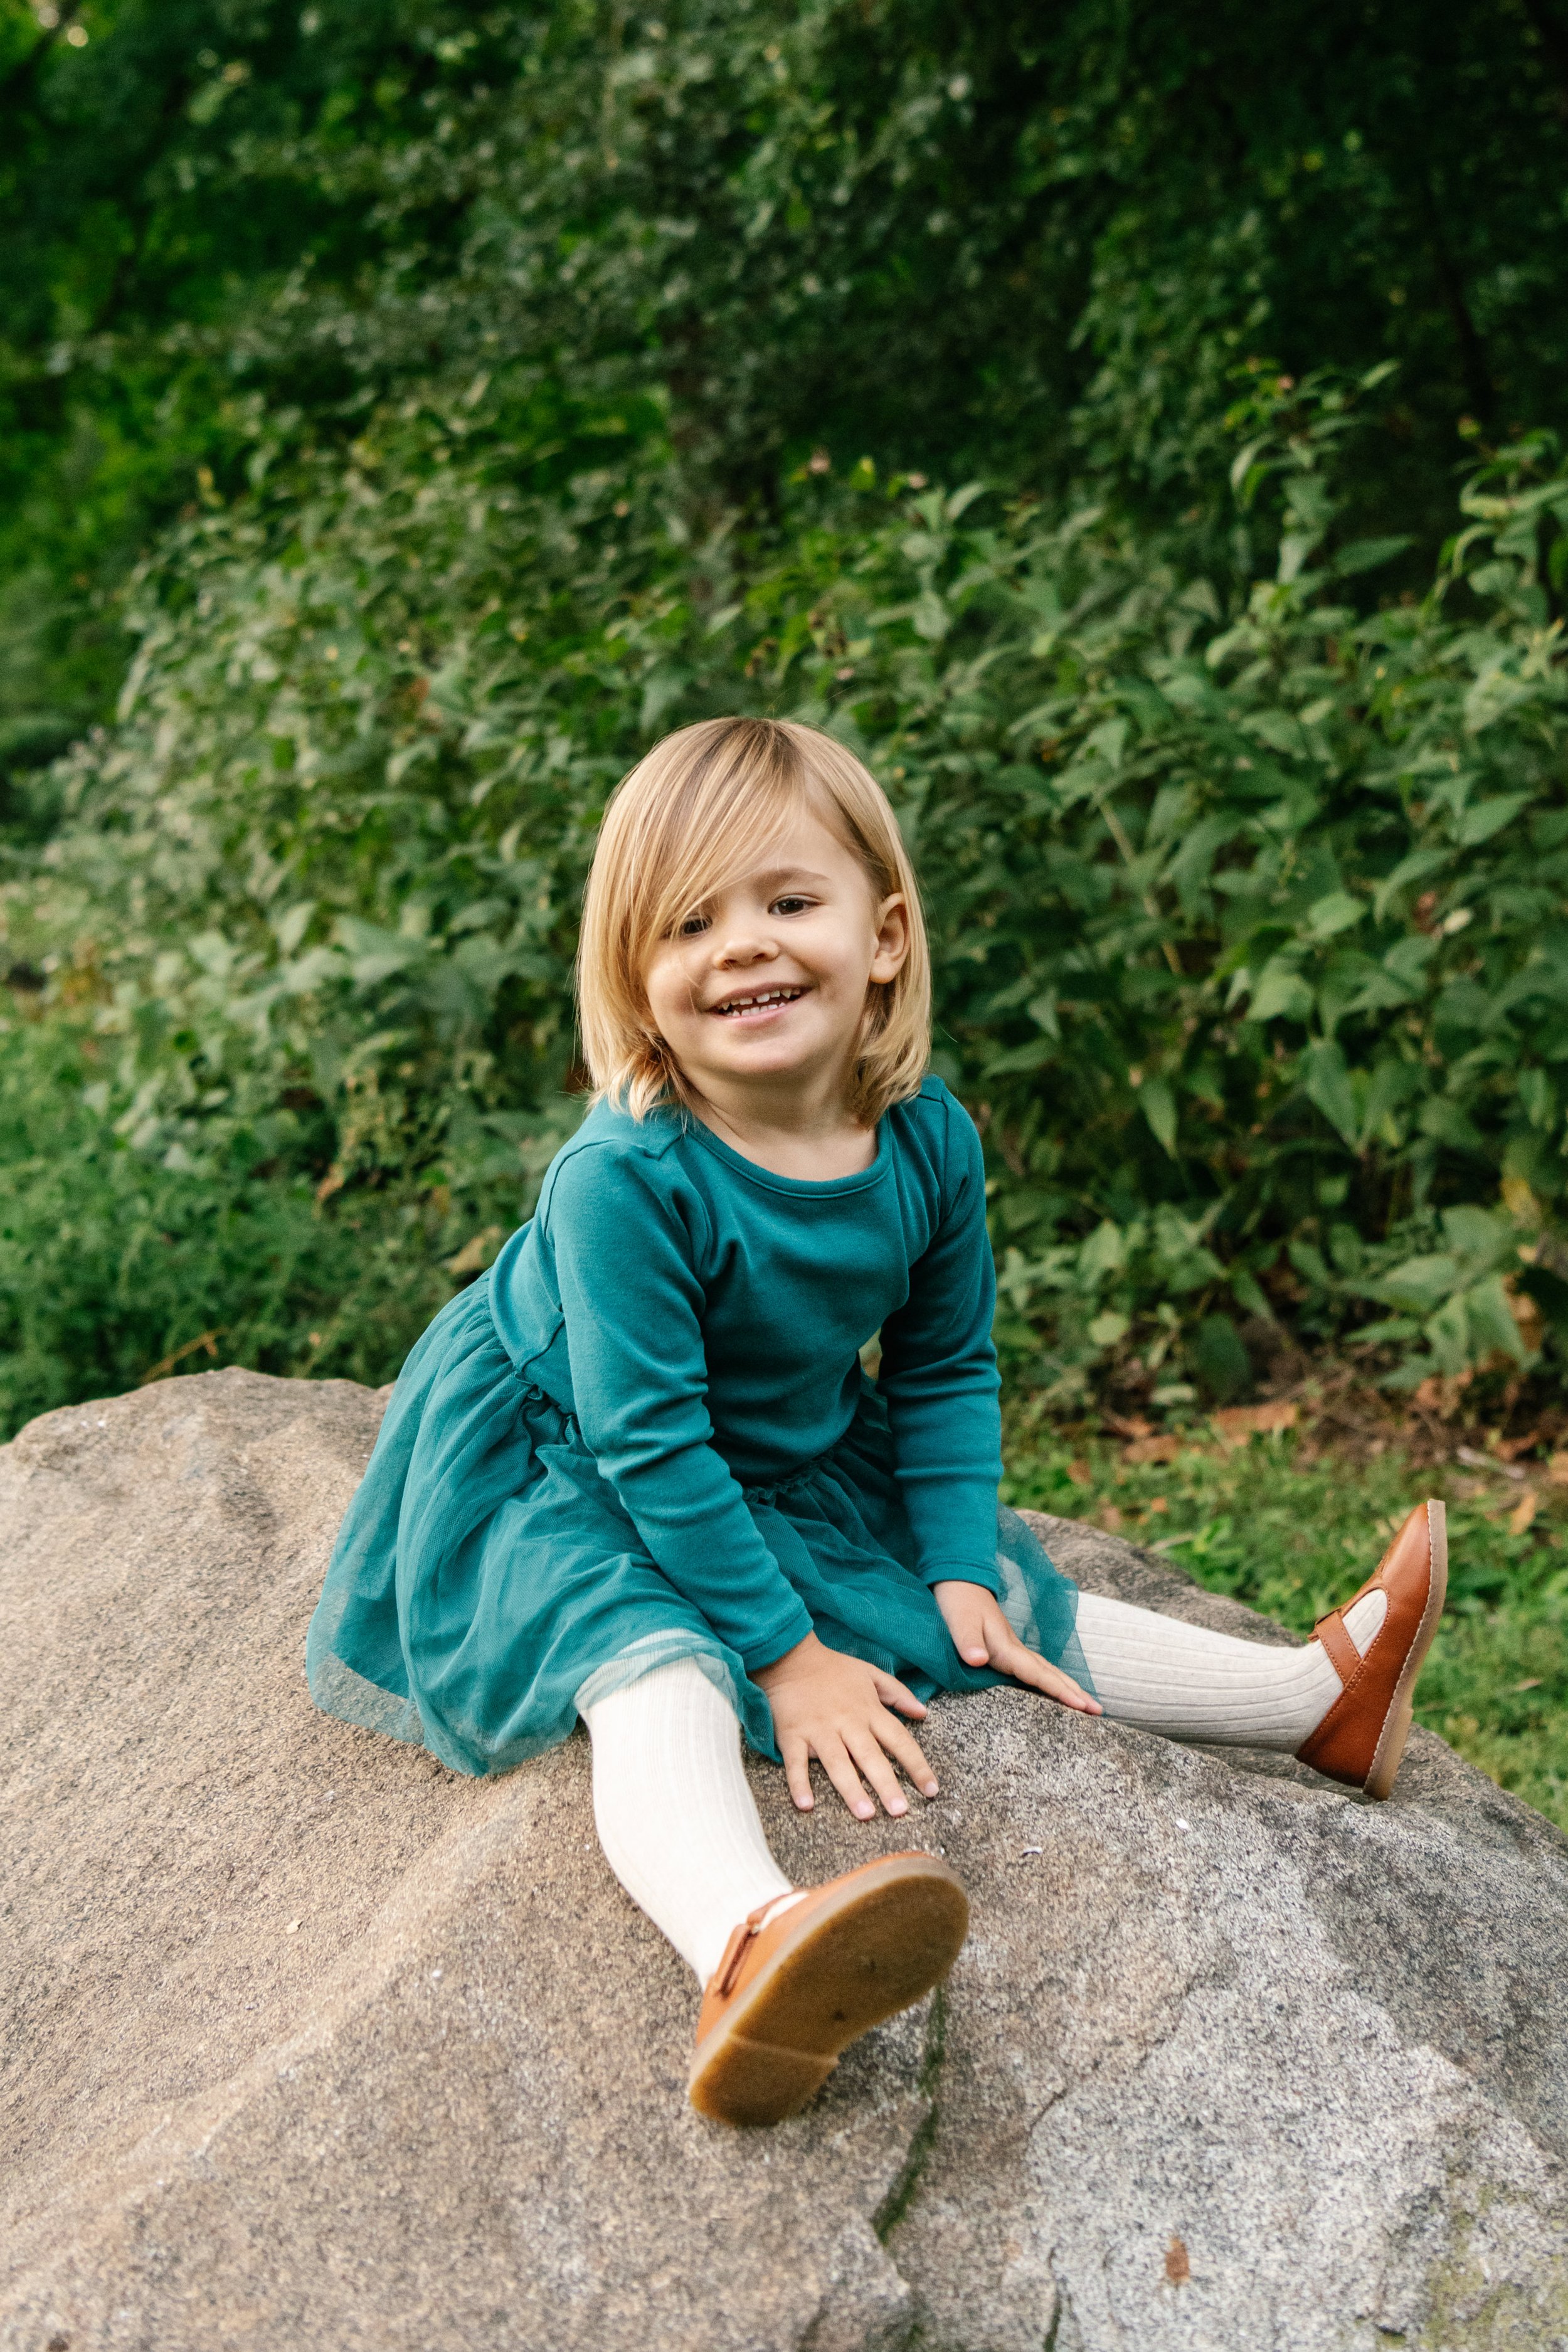  A little girl sits on a rock and smiles in Central Park by Nicole Hawkins Photography. sitting on a rock exploring girl Central Park #NicoleHawkinsPhotography #NicoleHawkinsFamilies #NJphotographers #familyphotos #CentralParkPhotography #CentralPark